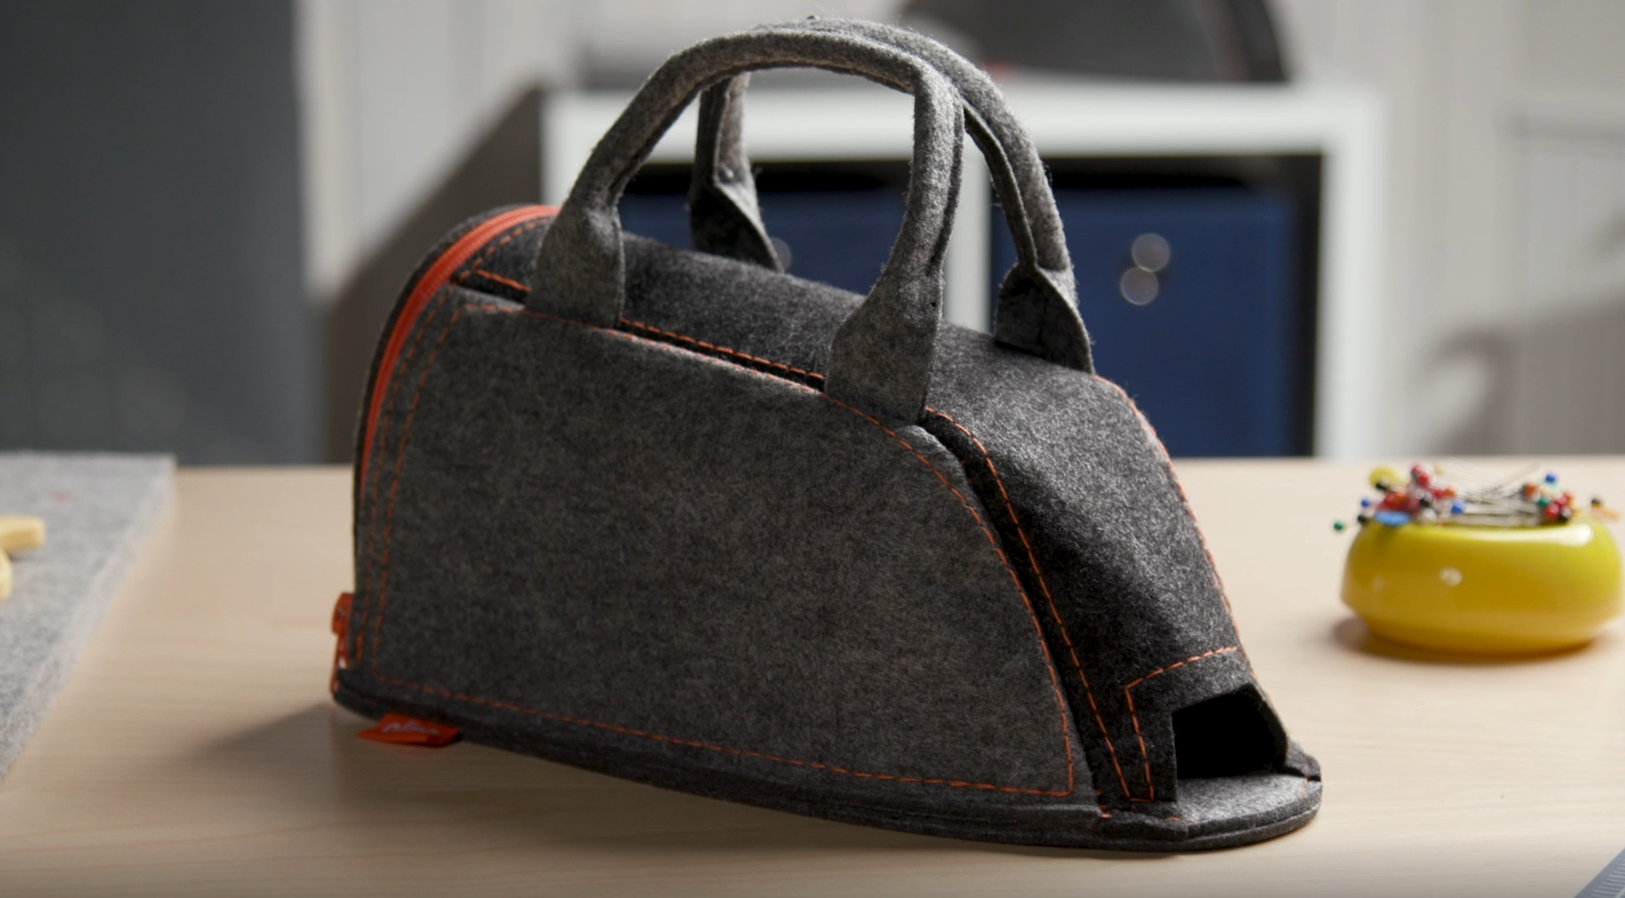 Video showing the details of the small Oliso iron carry bag. The felt bag provides stylish protection for your favorite iron. Practical design with  large zippered opening and front opening for the M2Pro SoleMate, iron sold separately. Click to play.